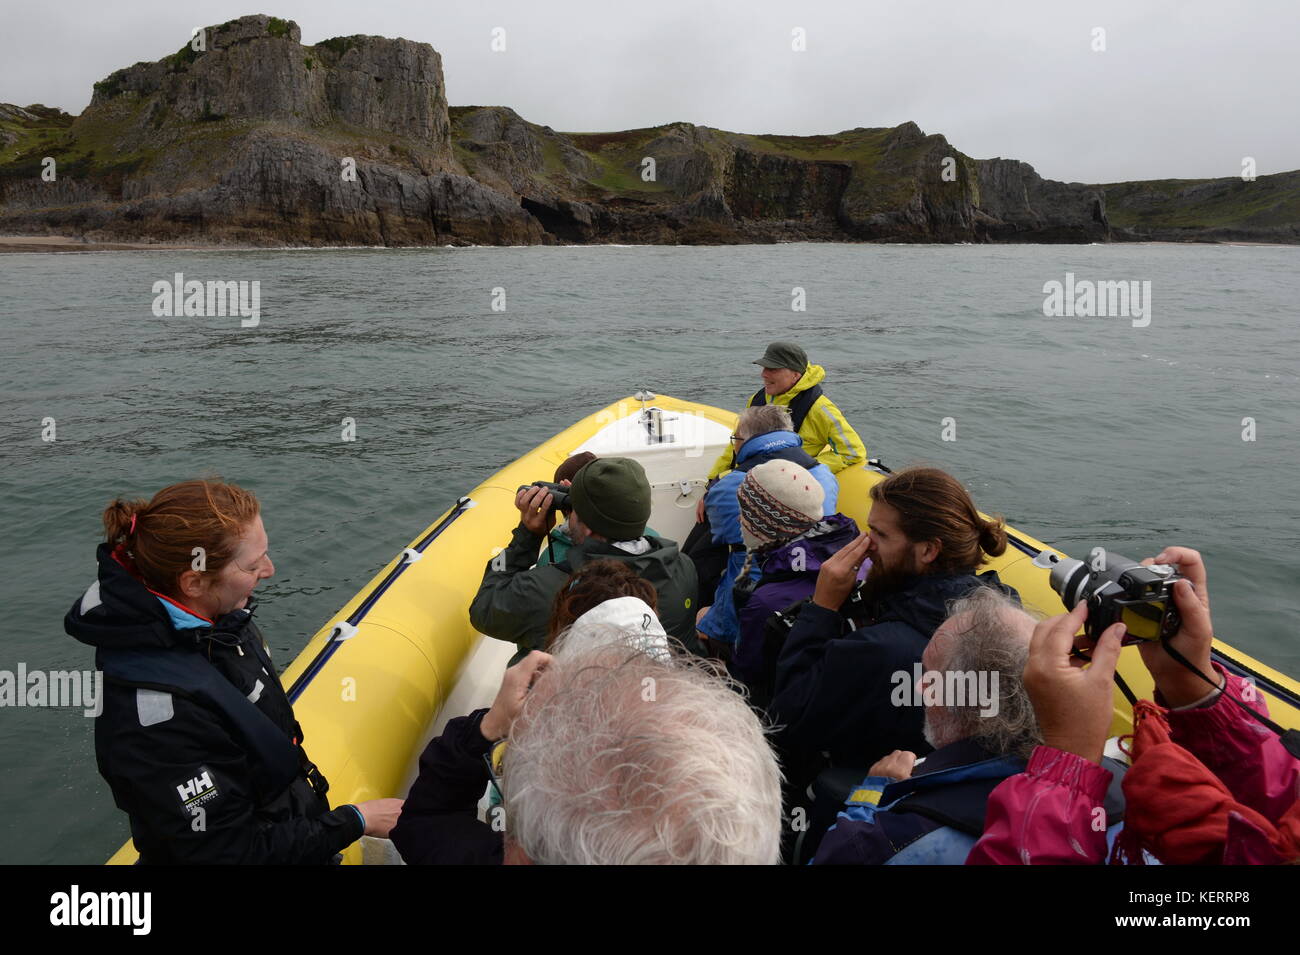 Viewing the Gower from a boat, a small group of people photograph and admire the coast from a rib Stock Photo